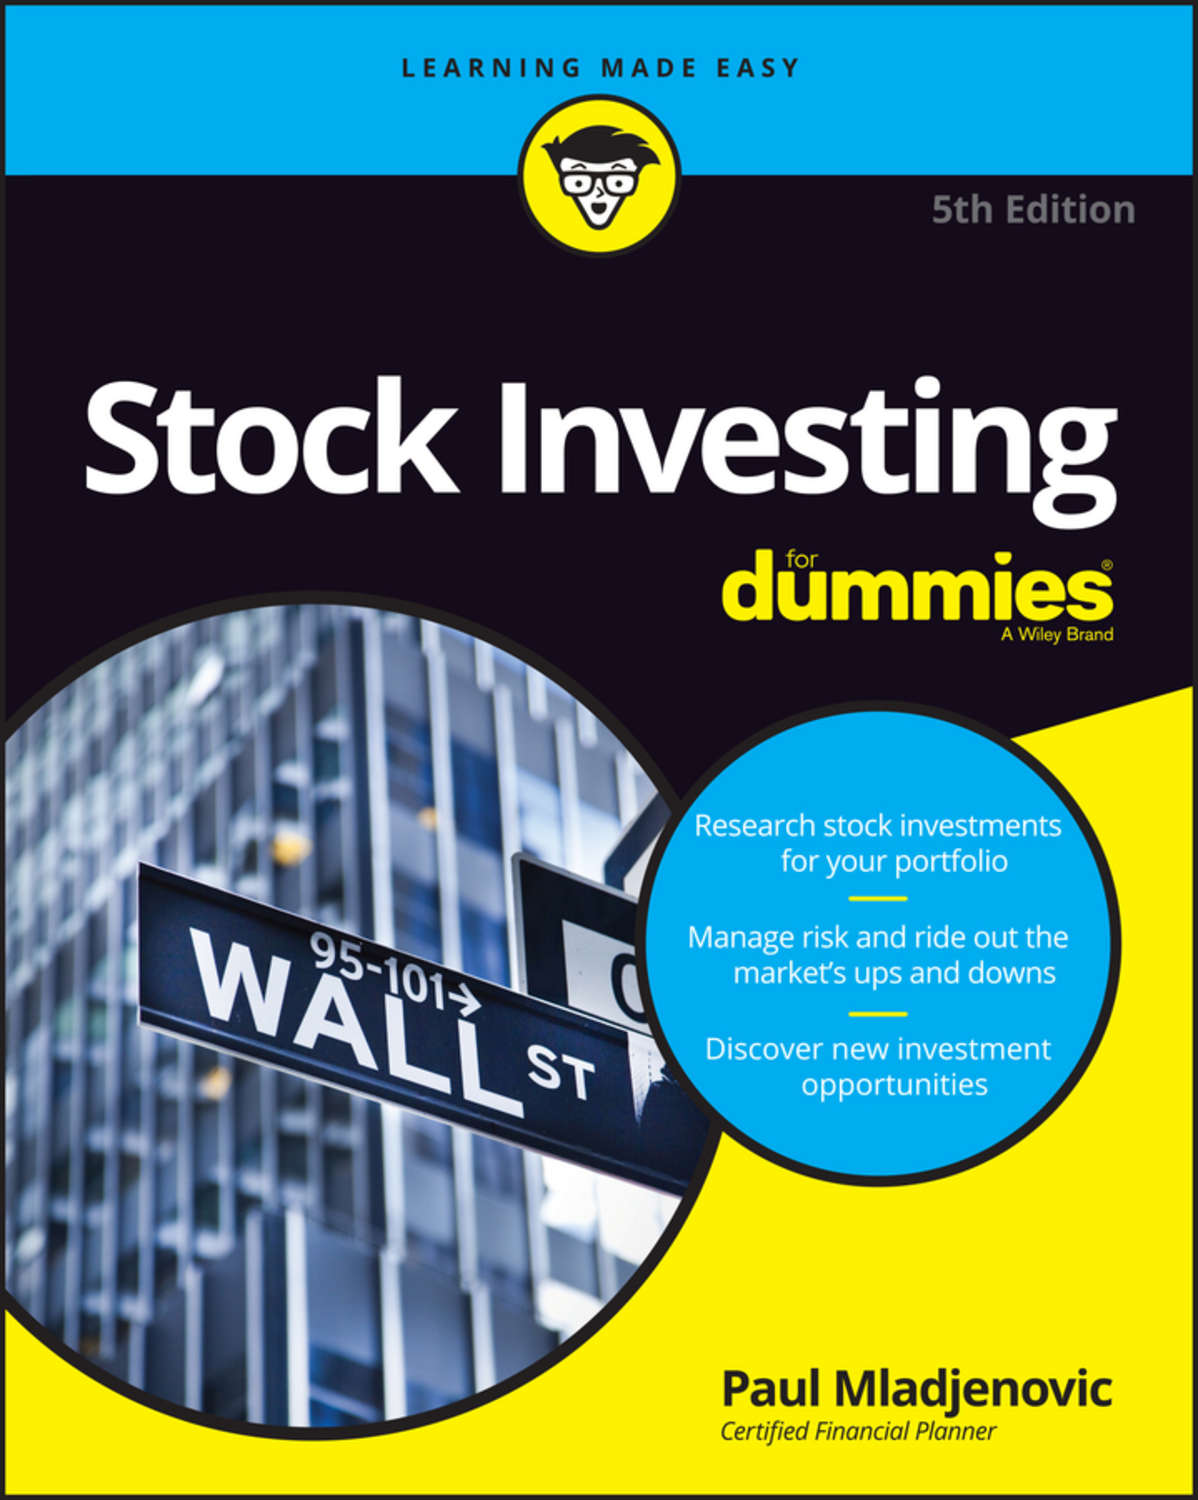 Stock investing for dummies paul mladjenovic pdf download btc course in hindi